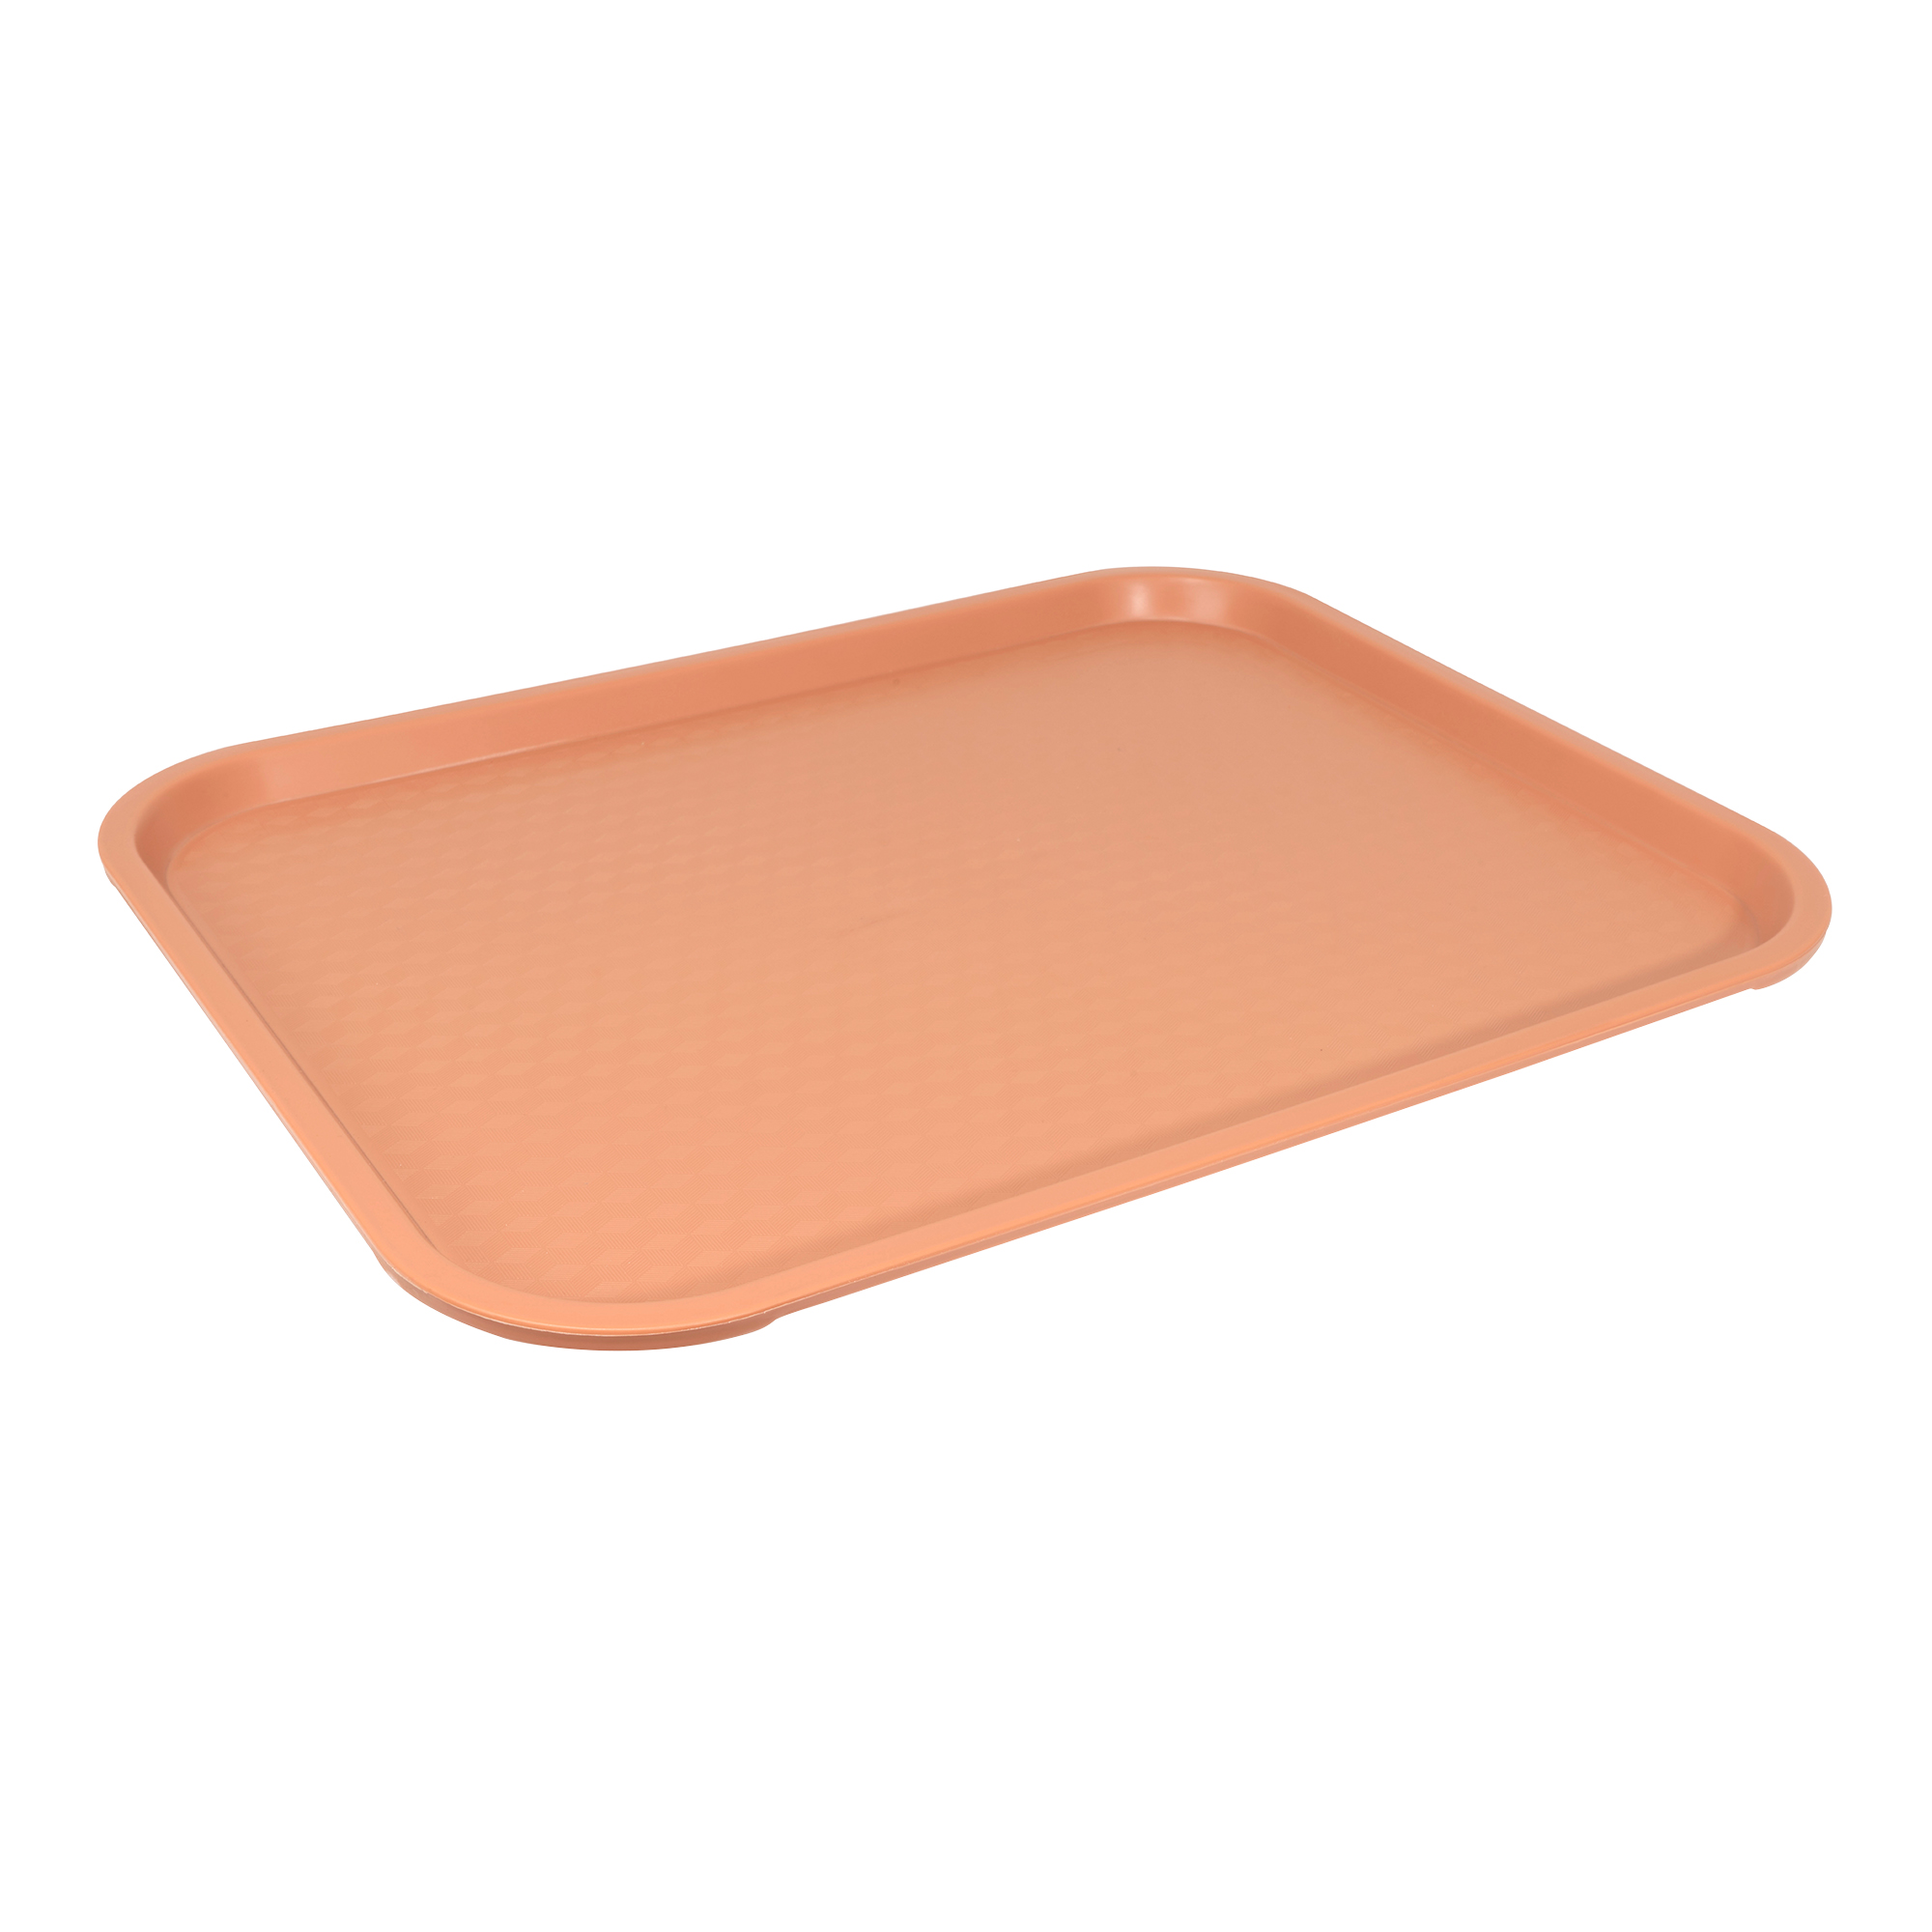 Plastic Cafeteria Serving Tray 17½" x 13¾"